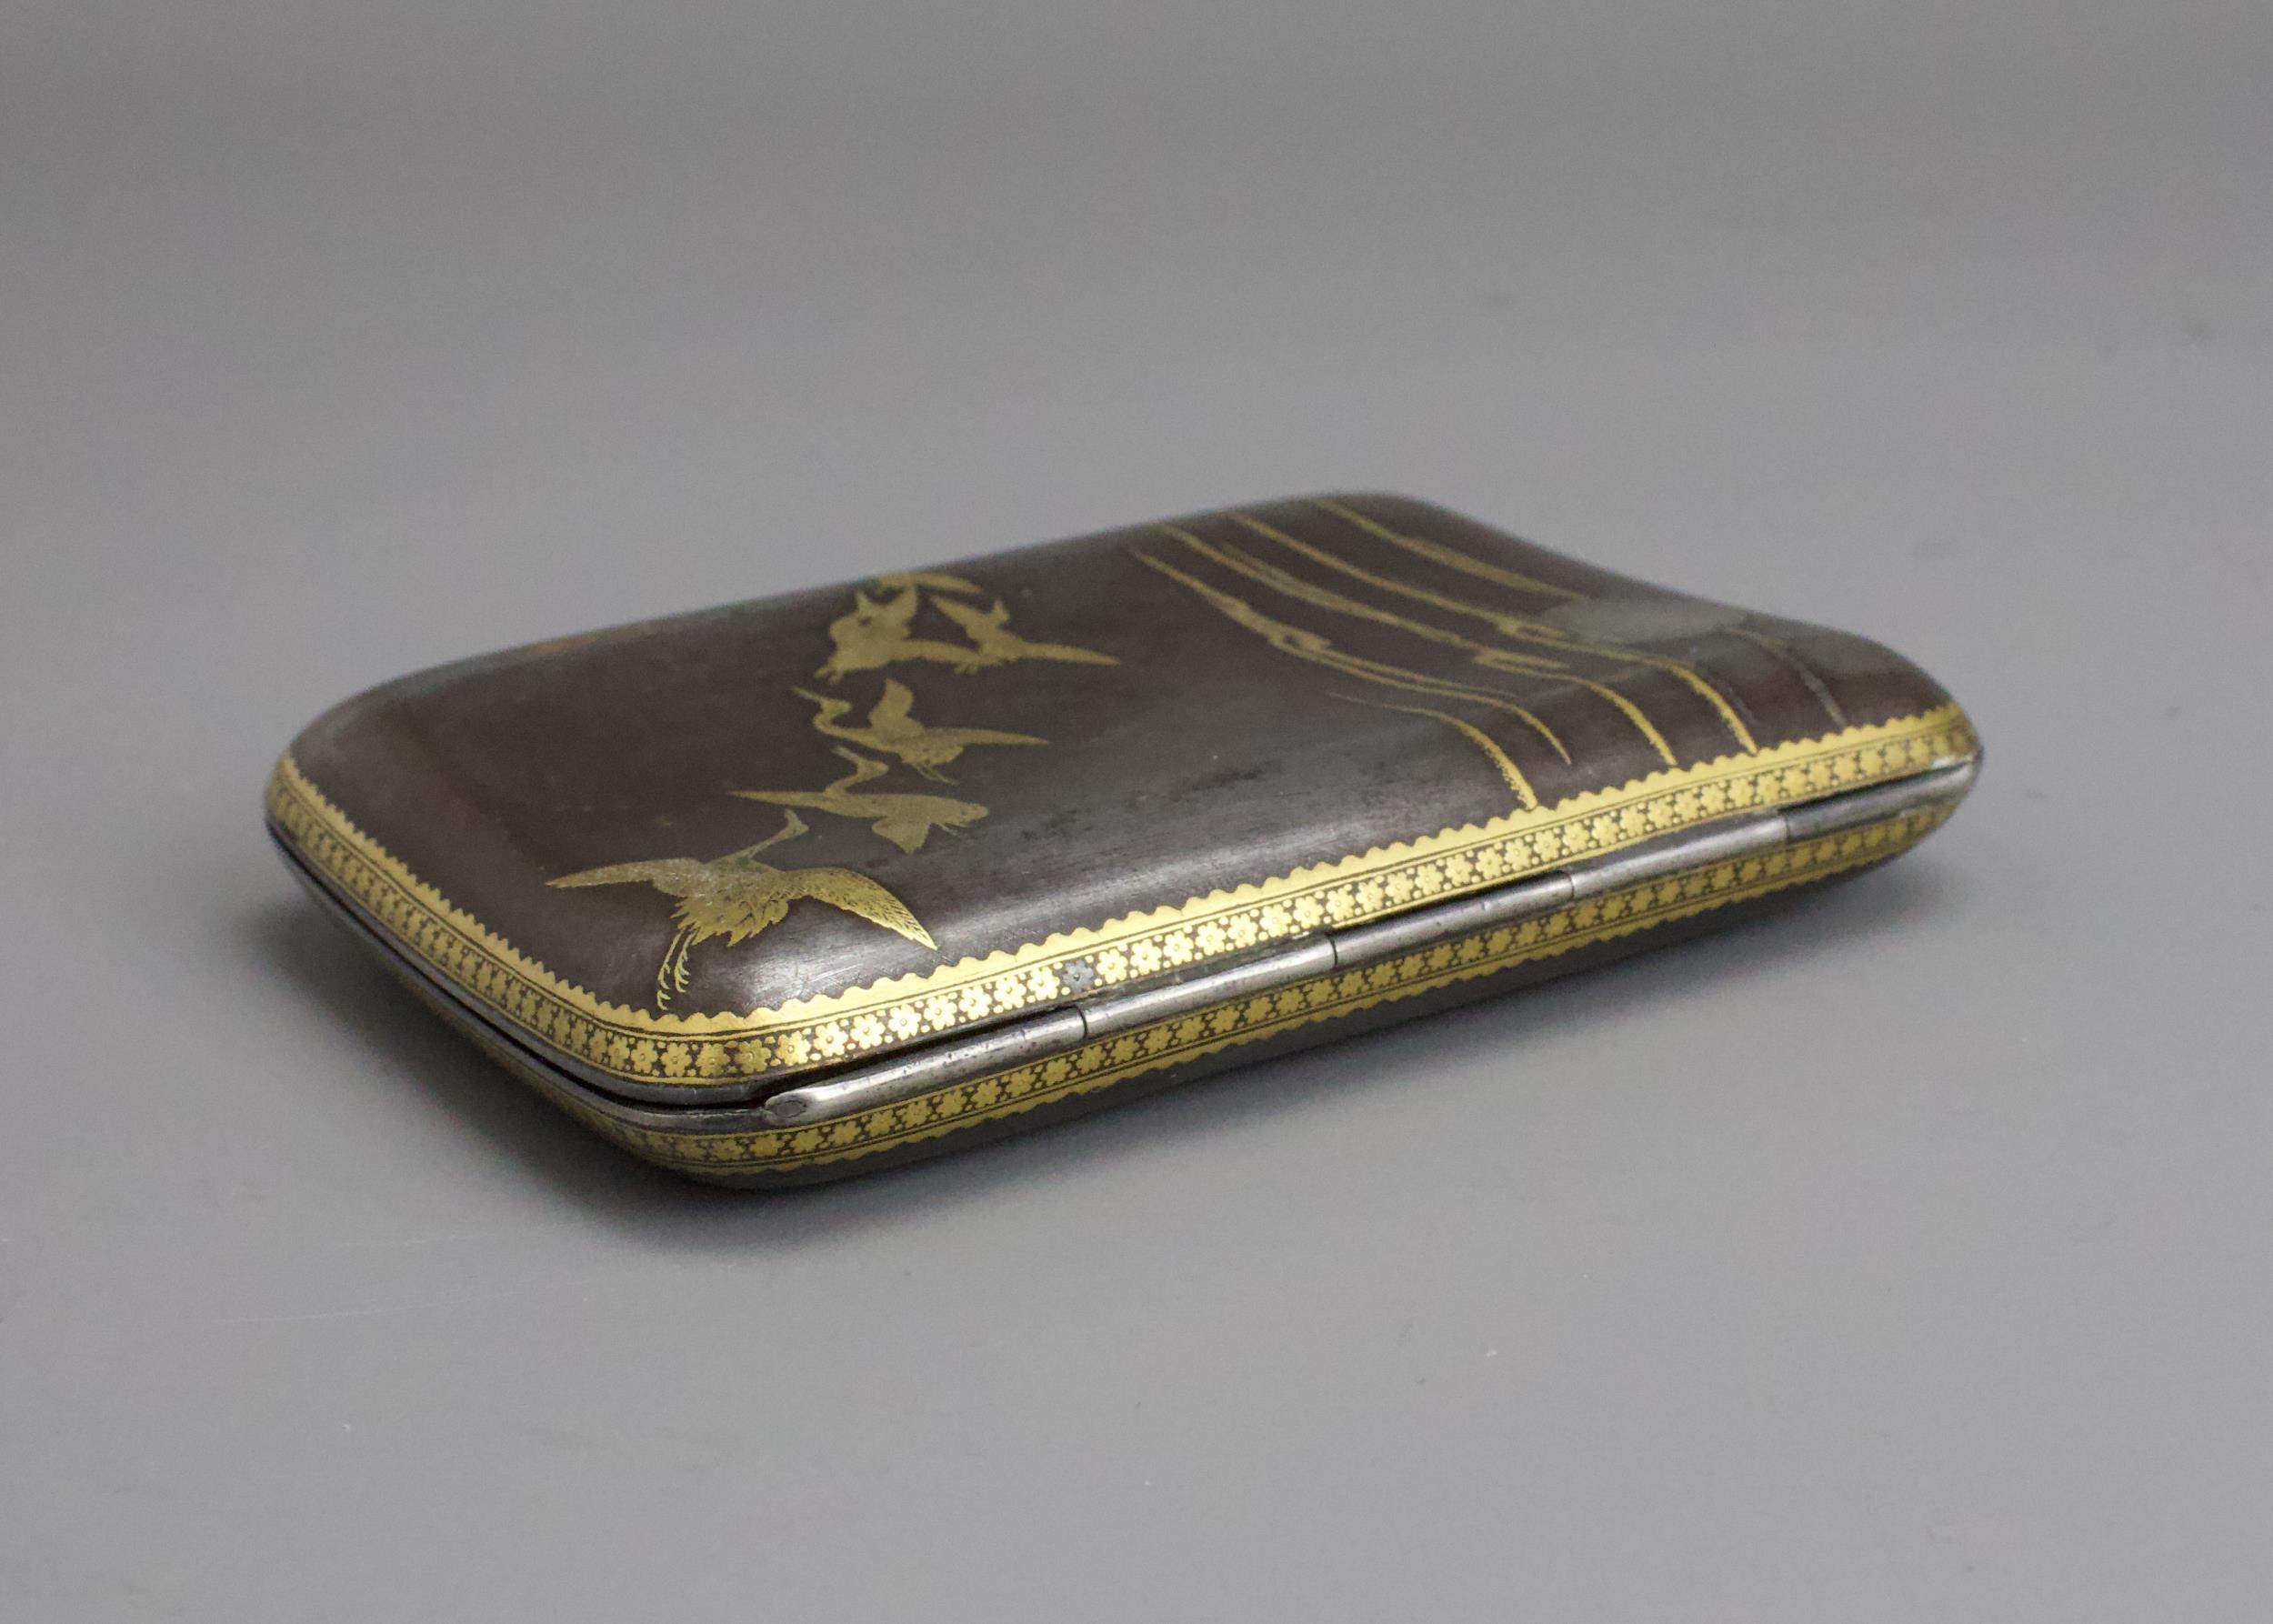 A Japanese Komai cigarette case, Meiji period - - W7cm L9cm H1.5cm - - inlaid in gilding and some - Image 4 of 4